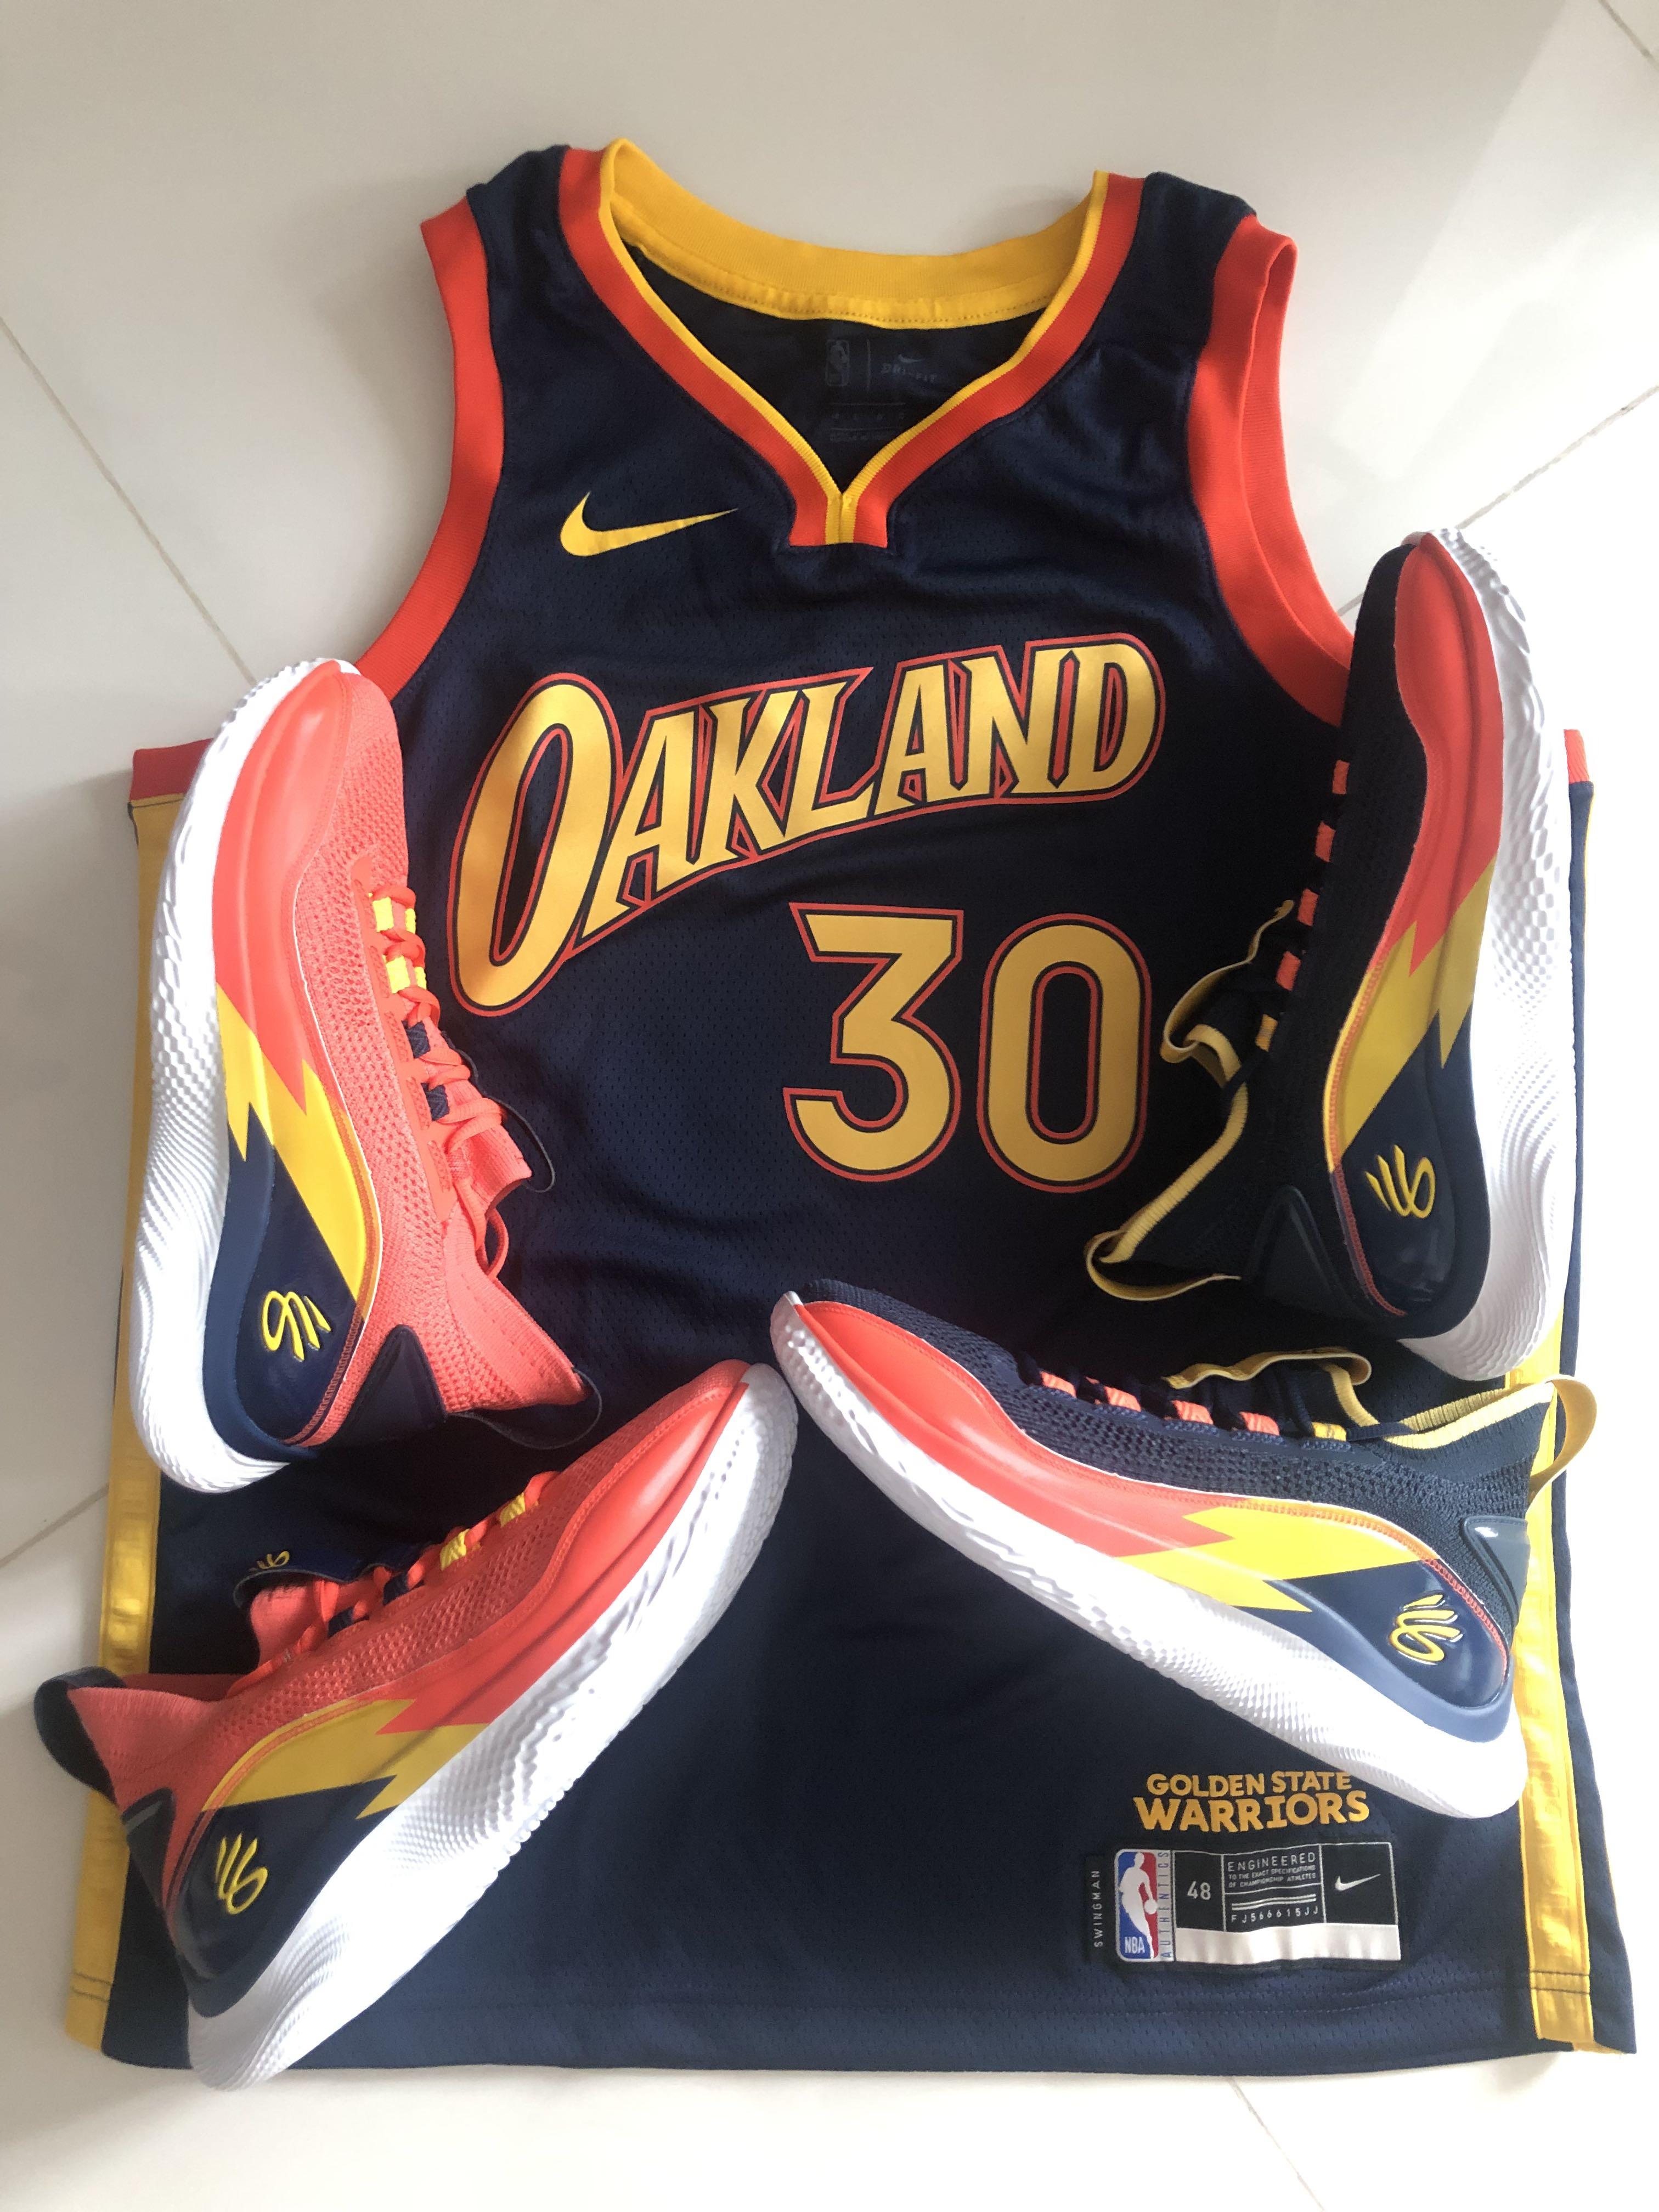 New Oakland uniform with 'We Believe' colorway leaks for Warriors